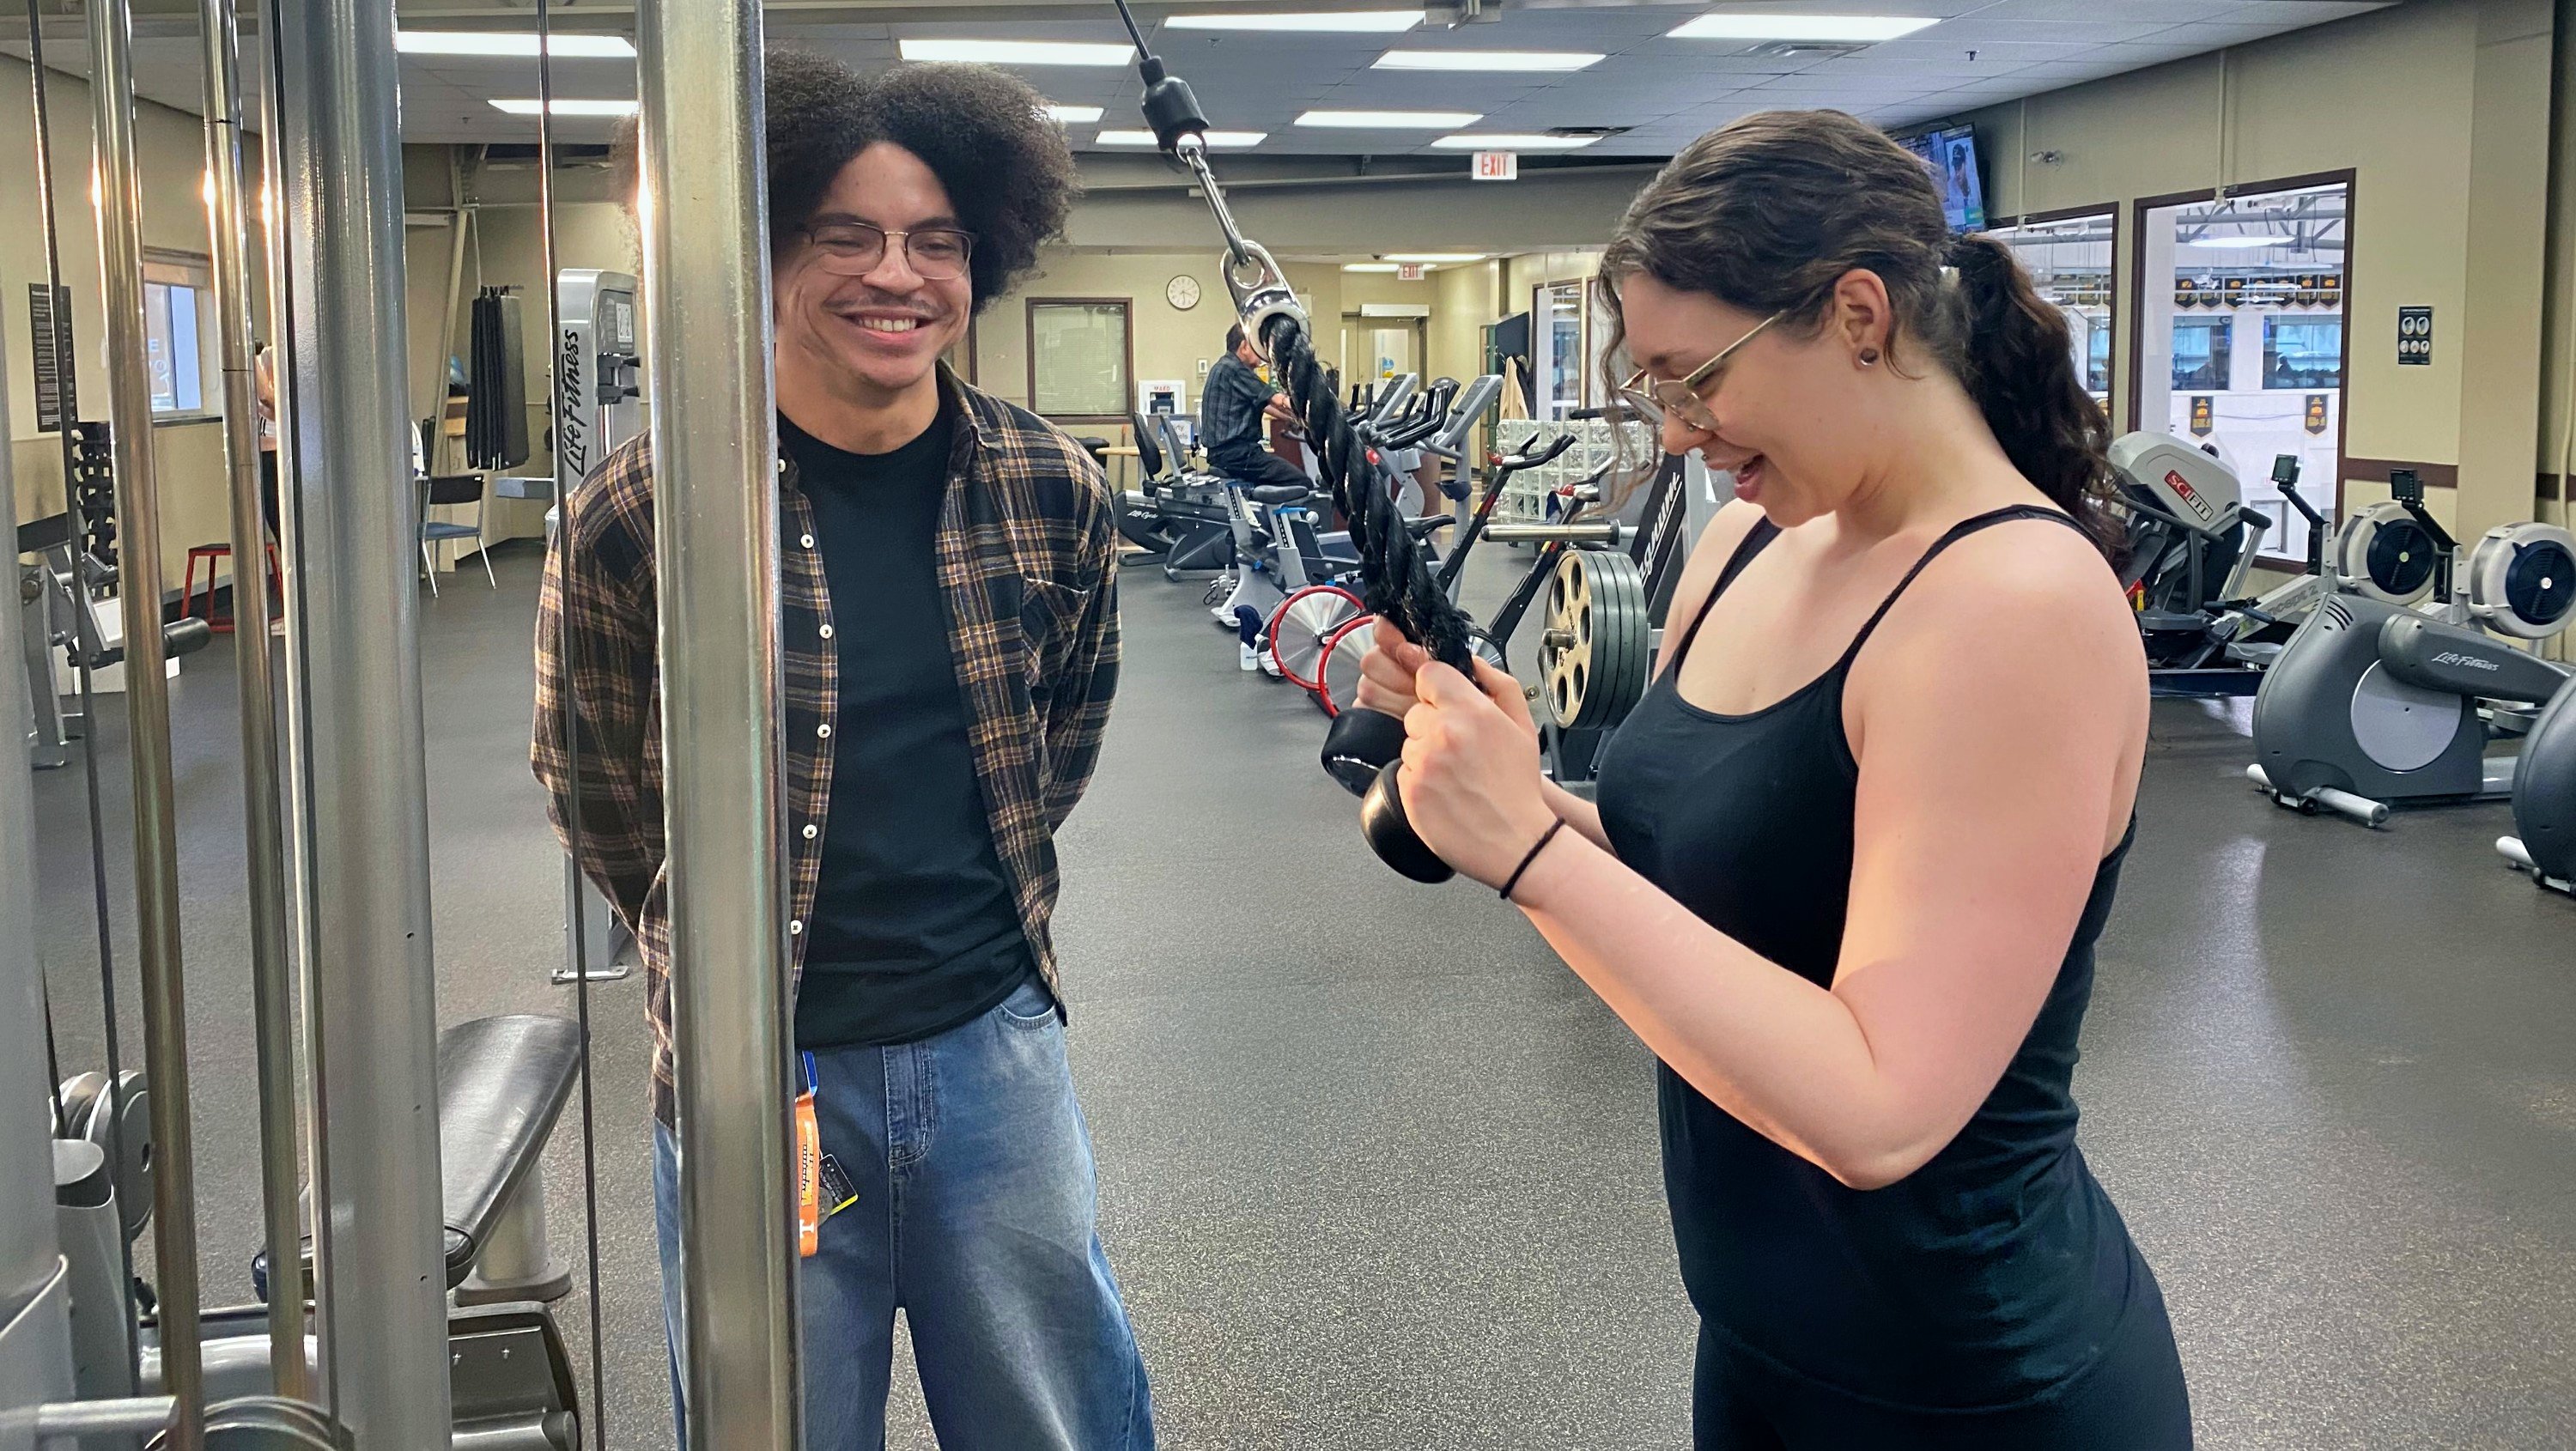 Student volunteer Delton Owens (left) assists an Indigenous Wellness Clinic client with weight training at the Saville Community Sports Centre. (Photo: Jennifer Fitzgerald)